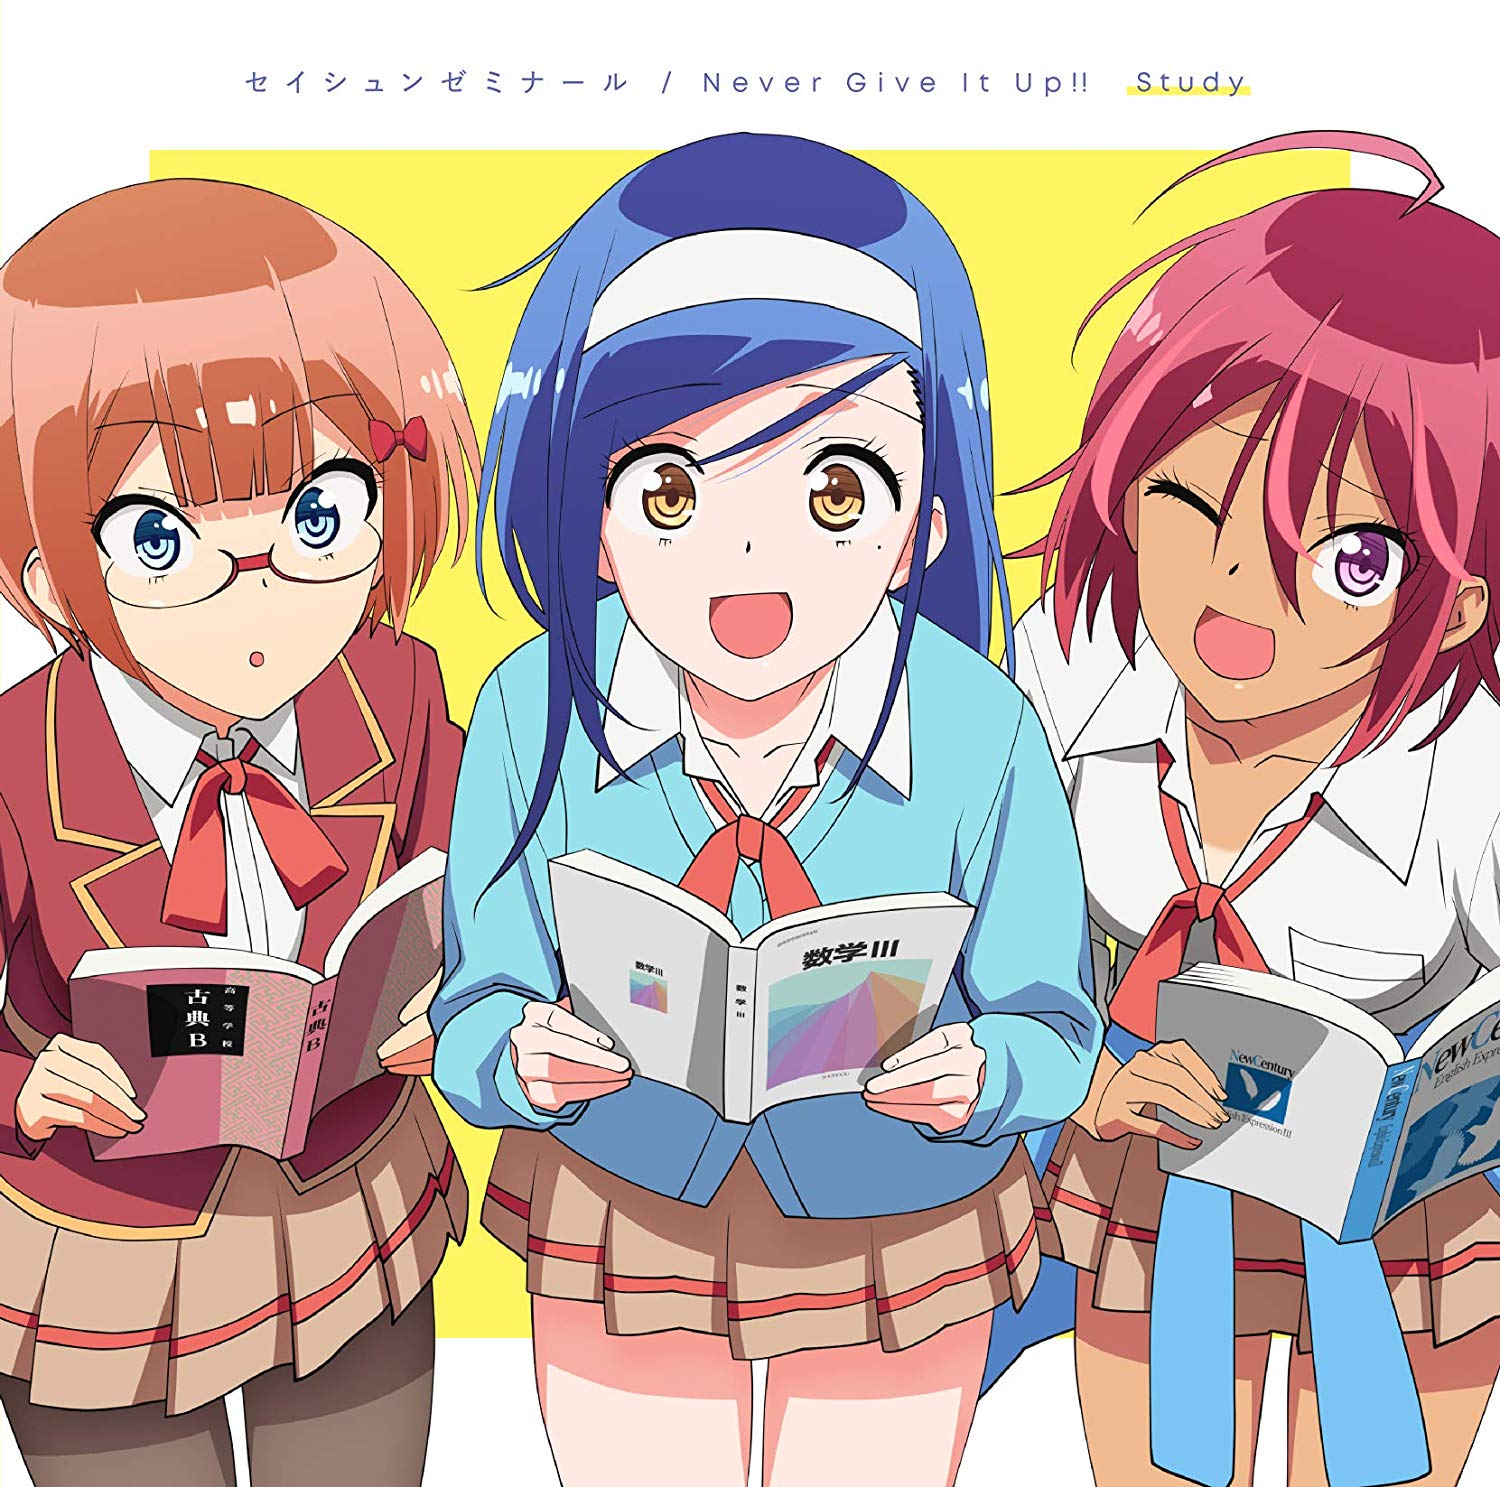 Discuss Everything About We Never Learn Wiki